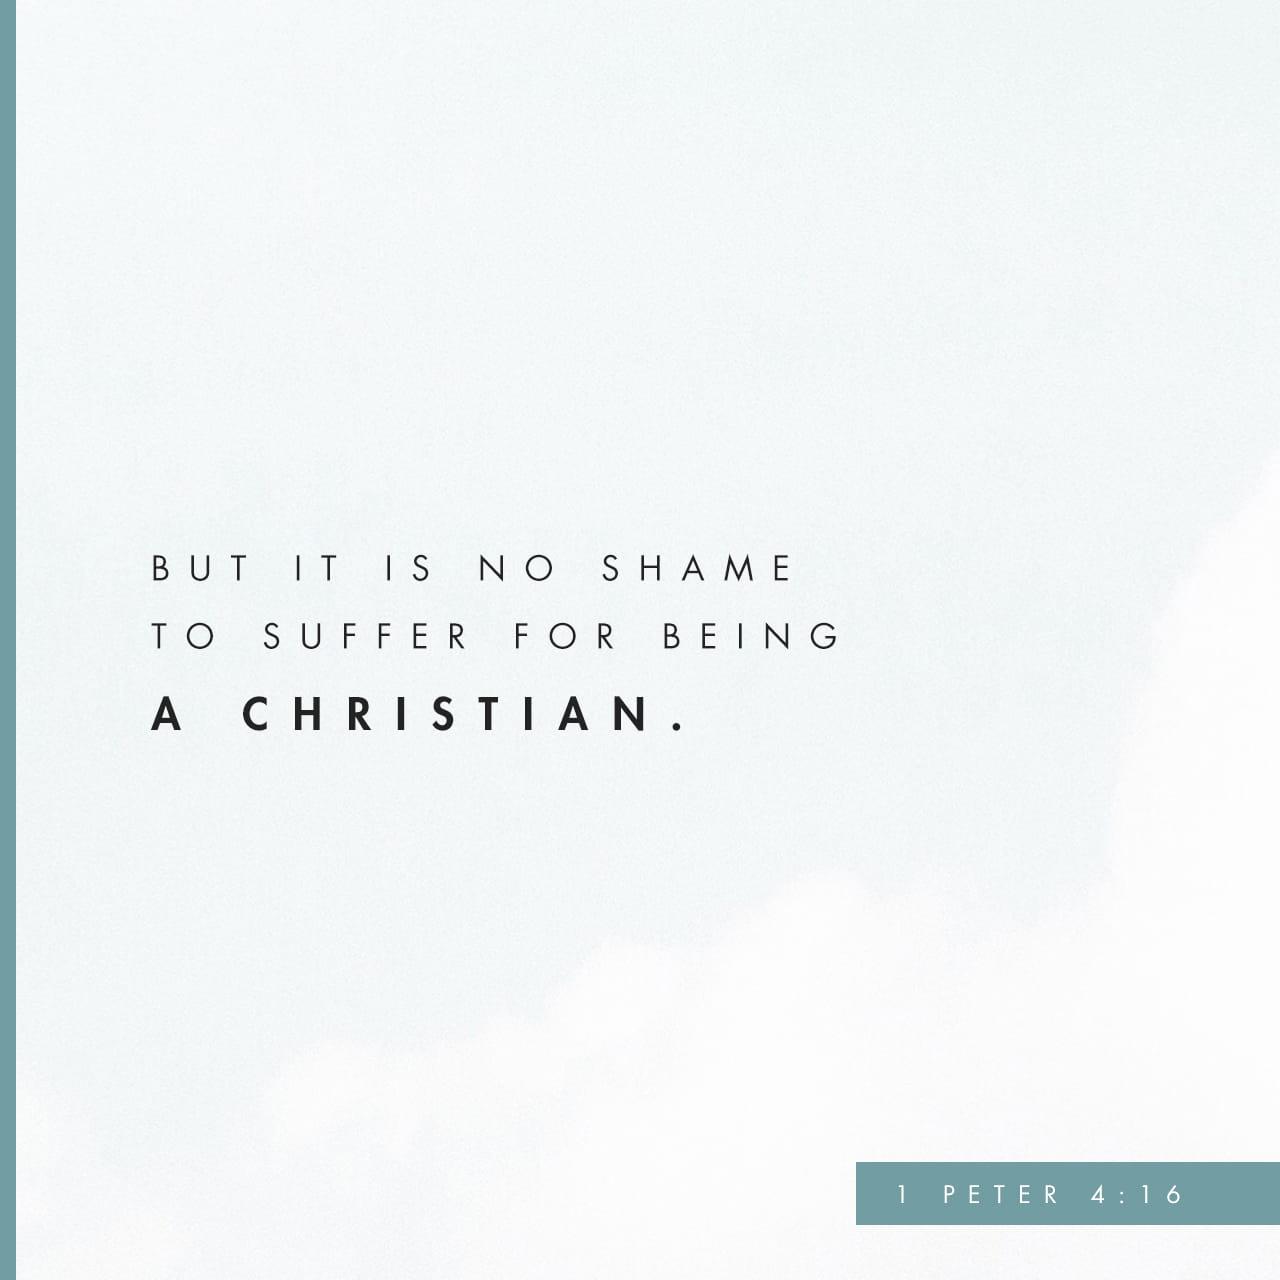 Bible Verse of the Day - day 153 - image 3076 (1 Peter 4:12-19)